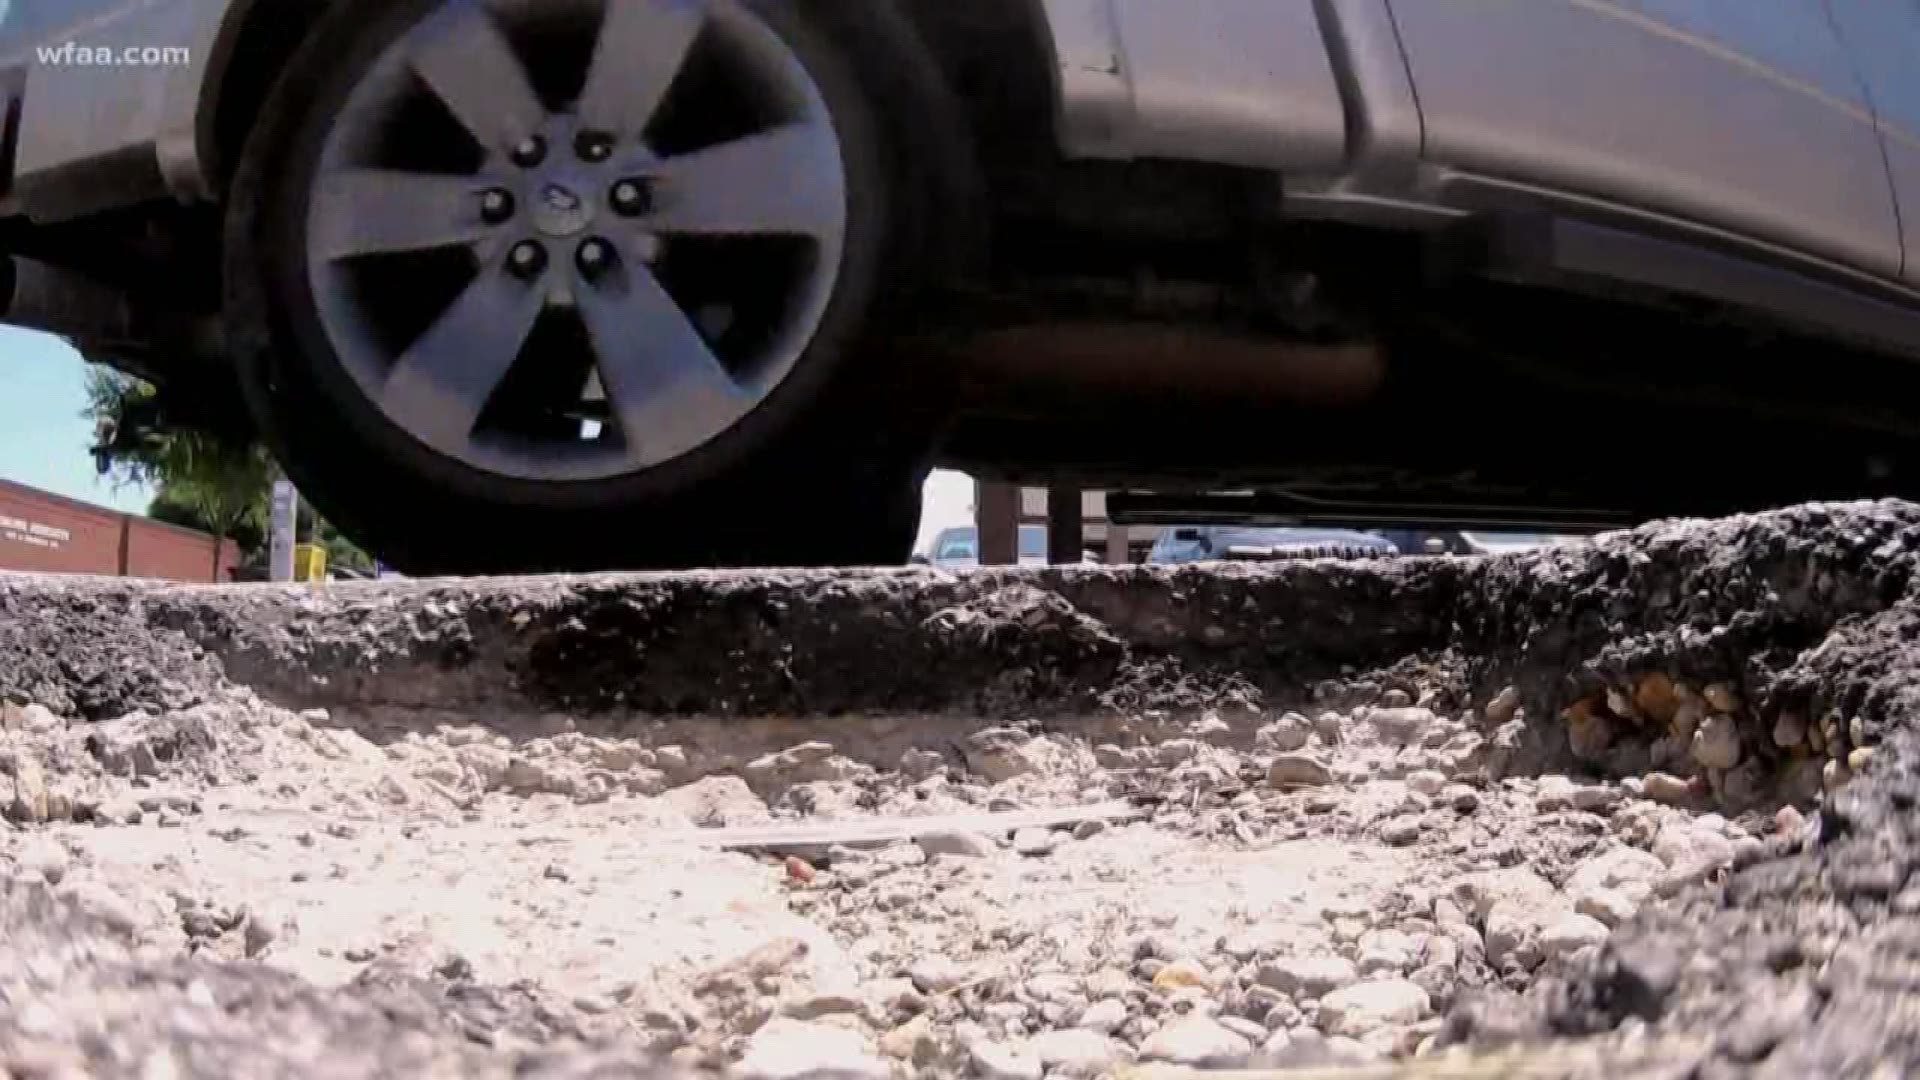 It's Pothole Month in the city of Fort Worth, and officials are asking residents to give them a call with roadway concerns.